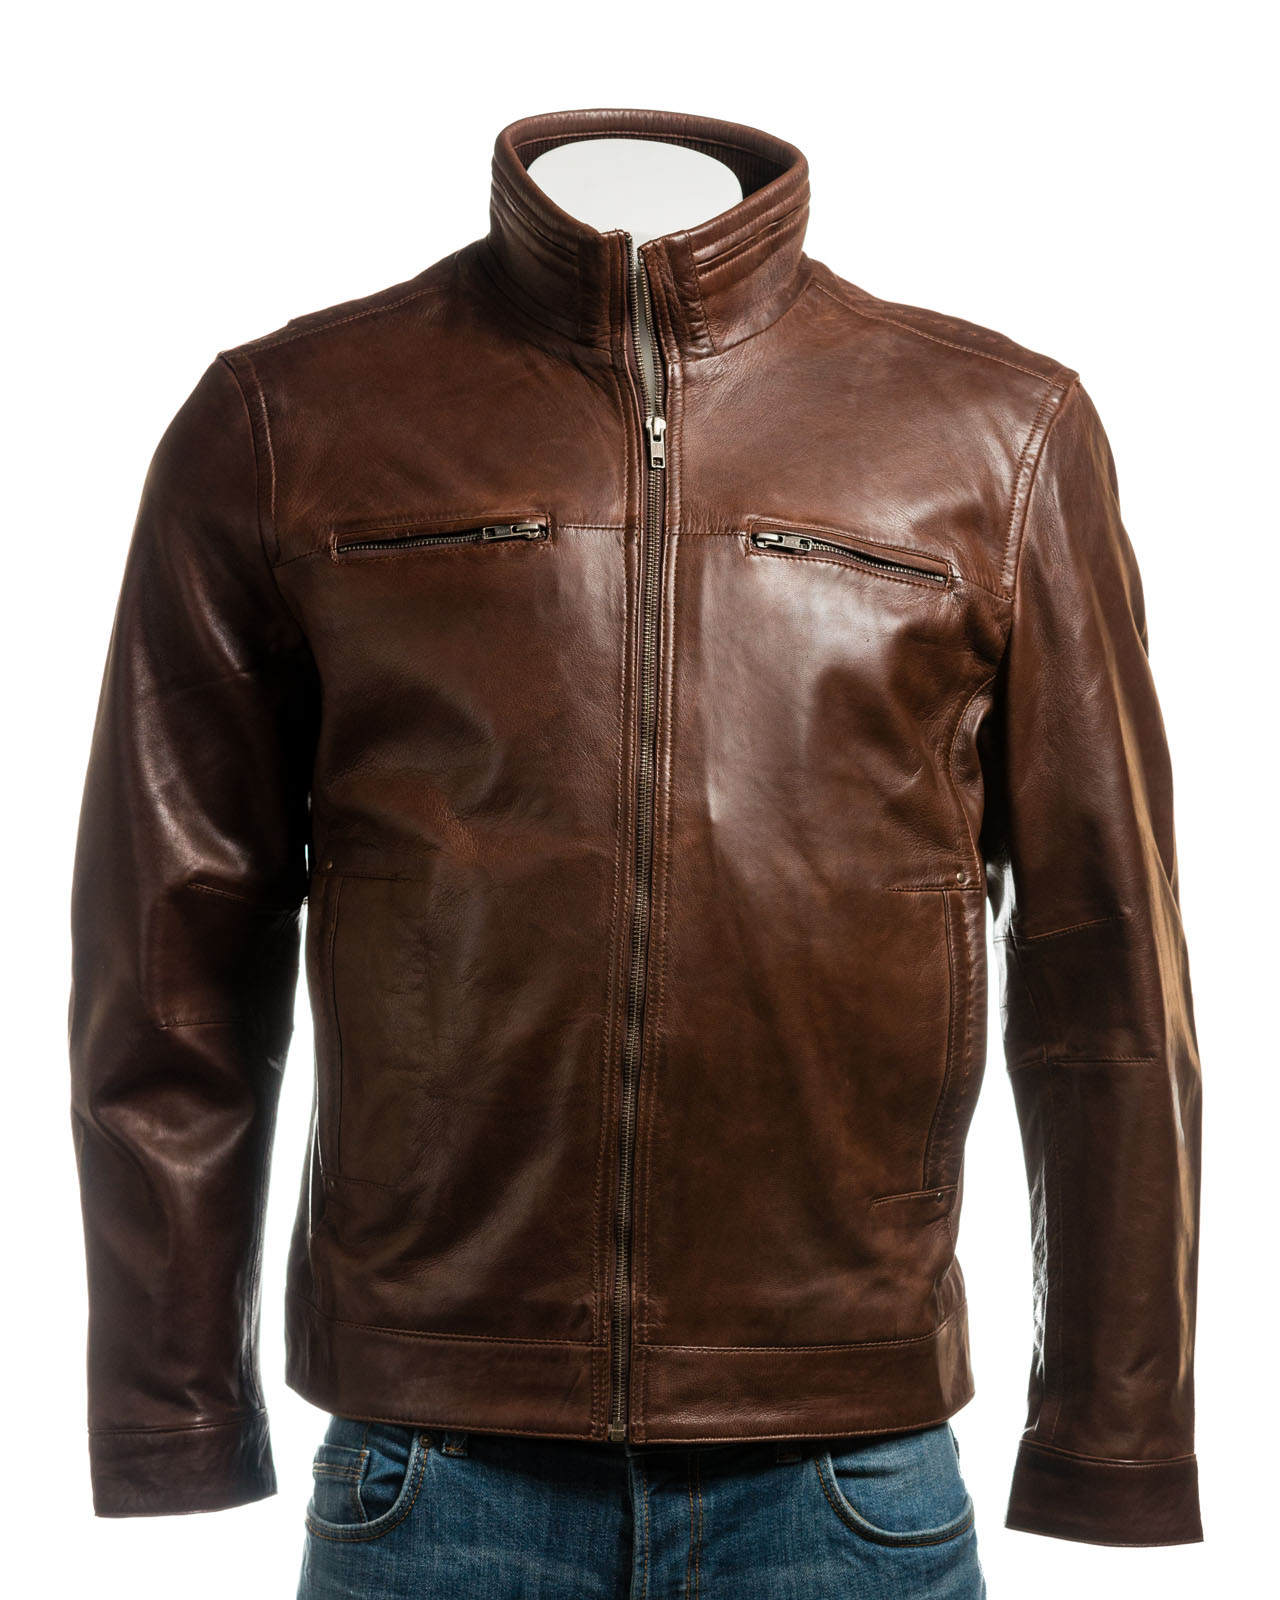 Men's Brown Funnel Neck Leather Jacket | Saffiano Leather